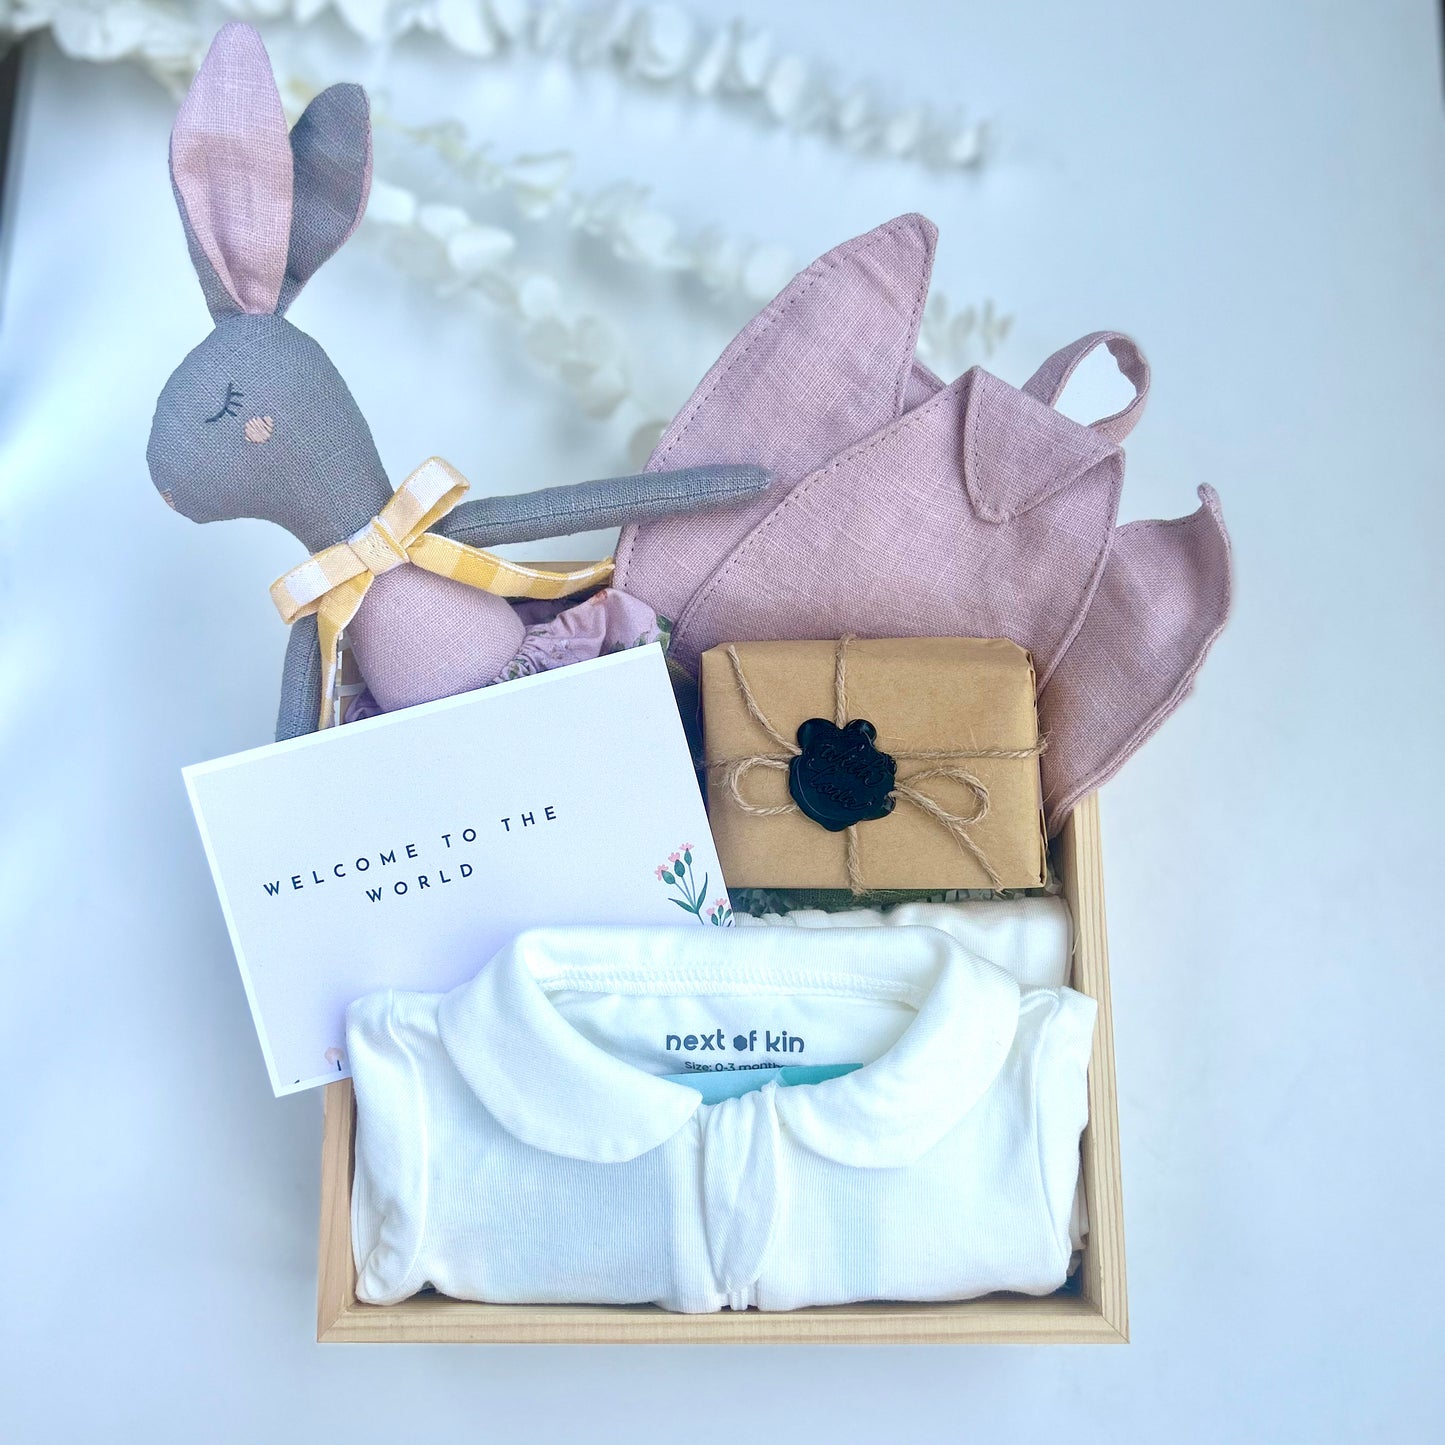 Welcome Baby Box